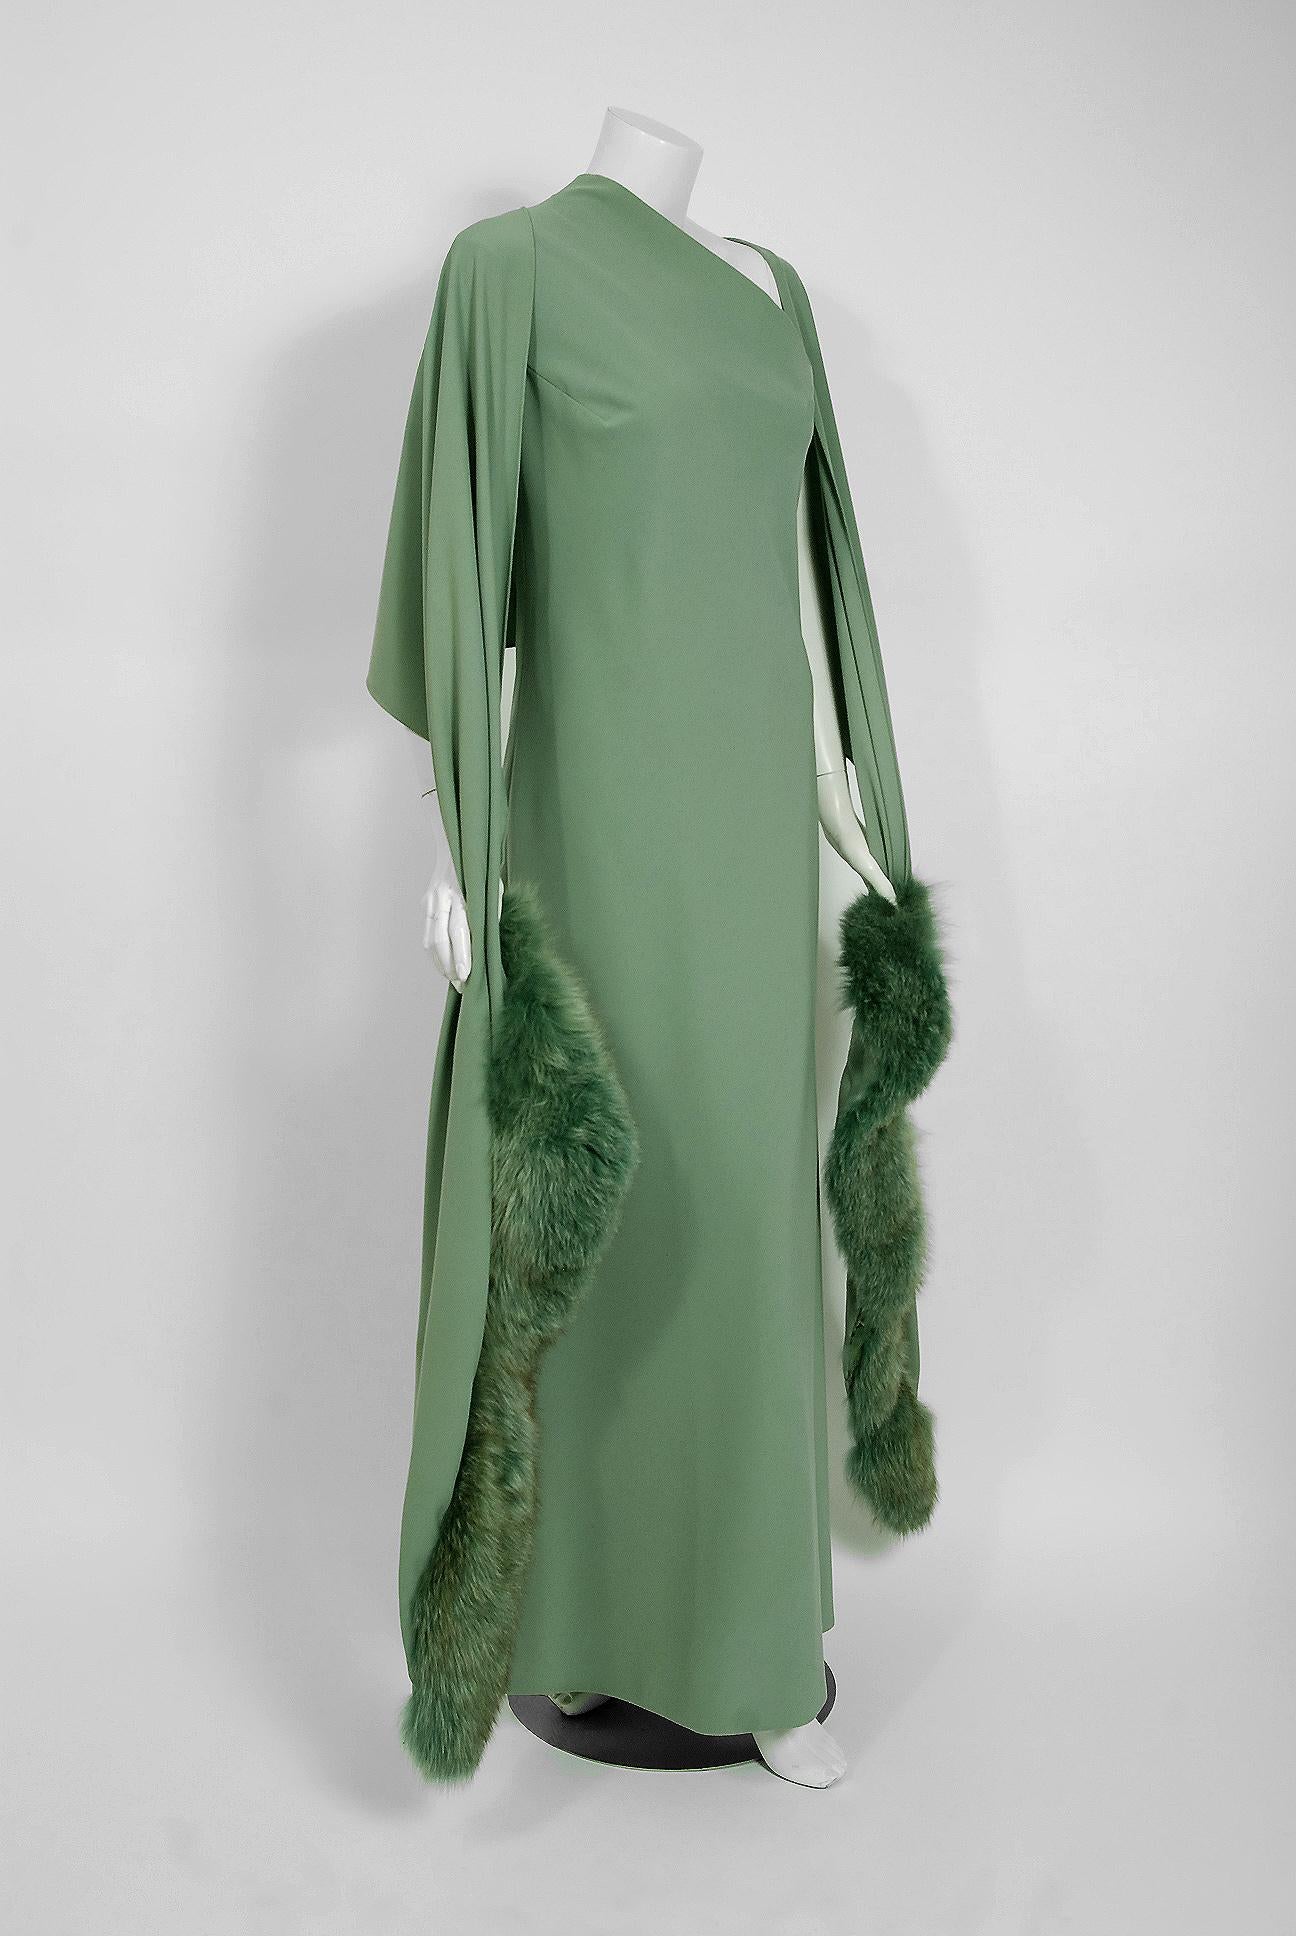 Exceptional Pauline Trigere designer seafoam green bias-cut gown dating back to the late 1960's During this time period, Pauline Trigère's name was part of the glamorous excess in Hollywood fashion. Her exquisite tailoring and feminine fitting